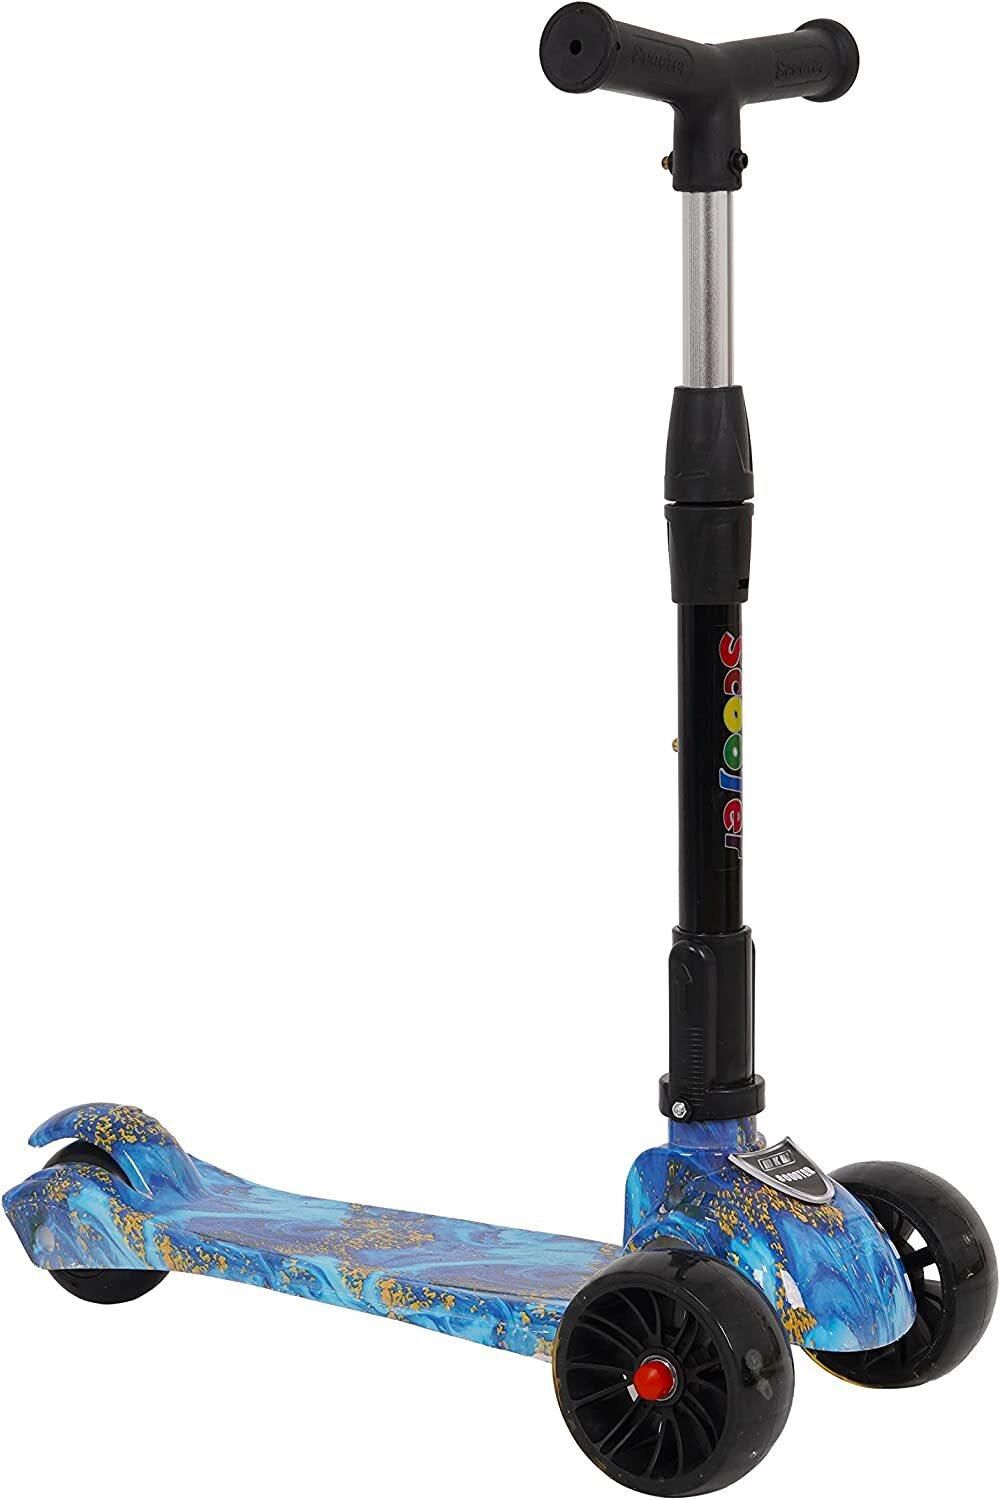 Lovely Baby Foldable Kick Scooter LB 103W For Kids, 3 Wheel Kids Scooter Smart Kick Scooter (Blue)